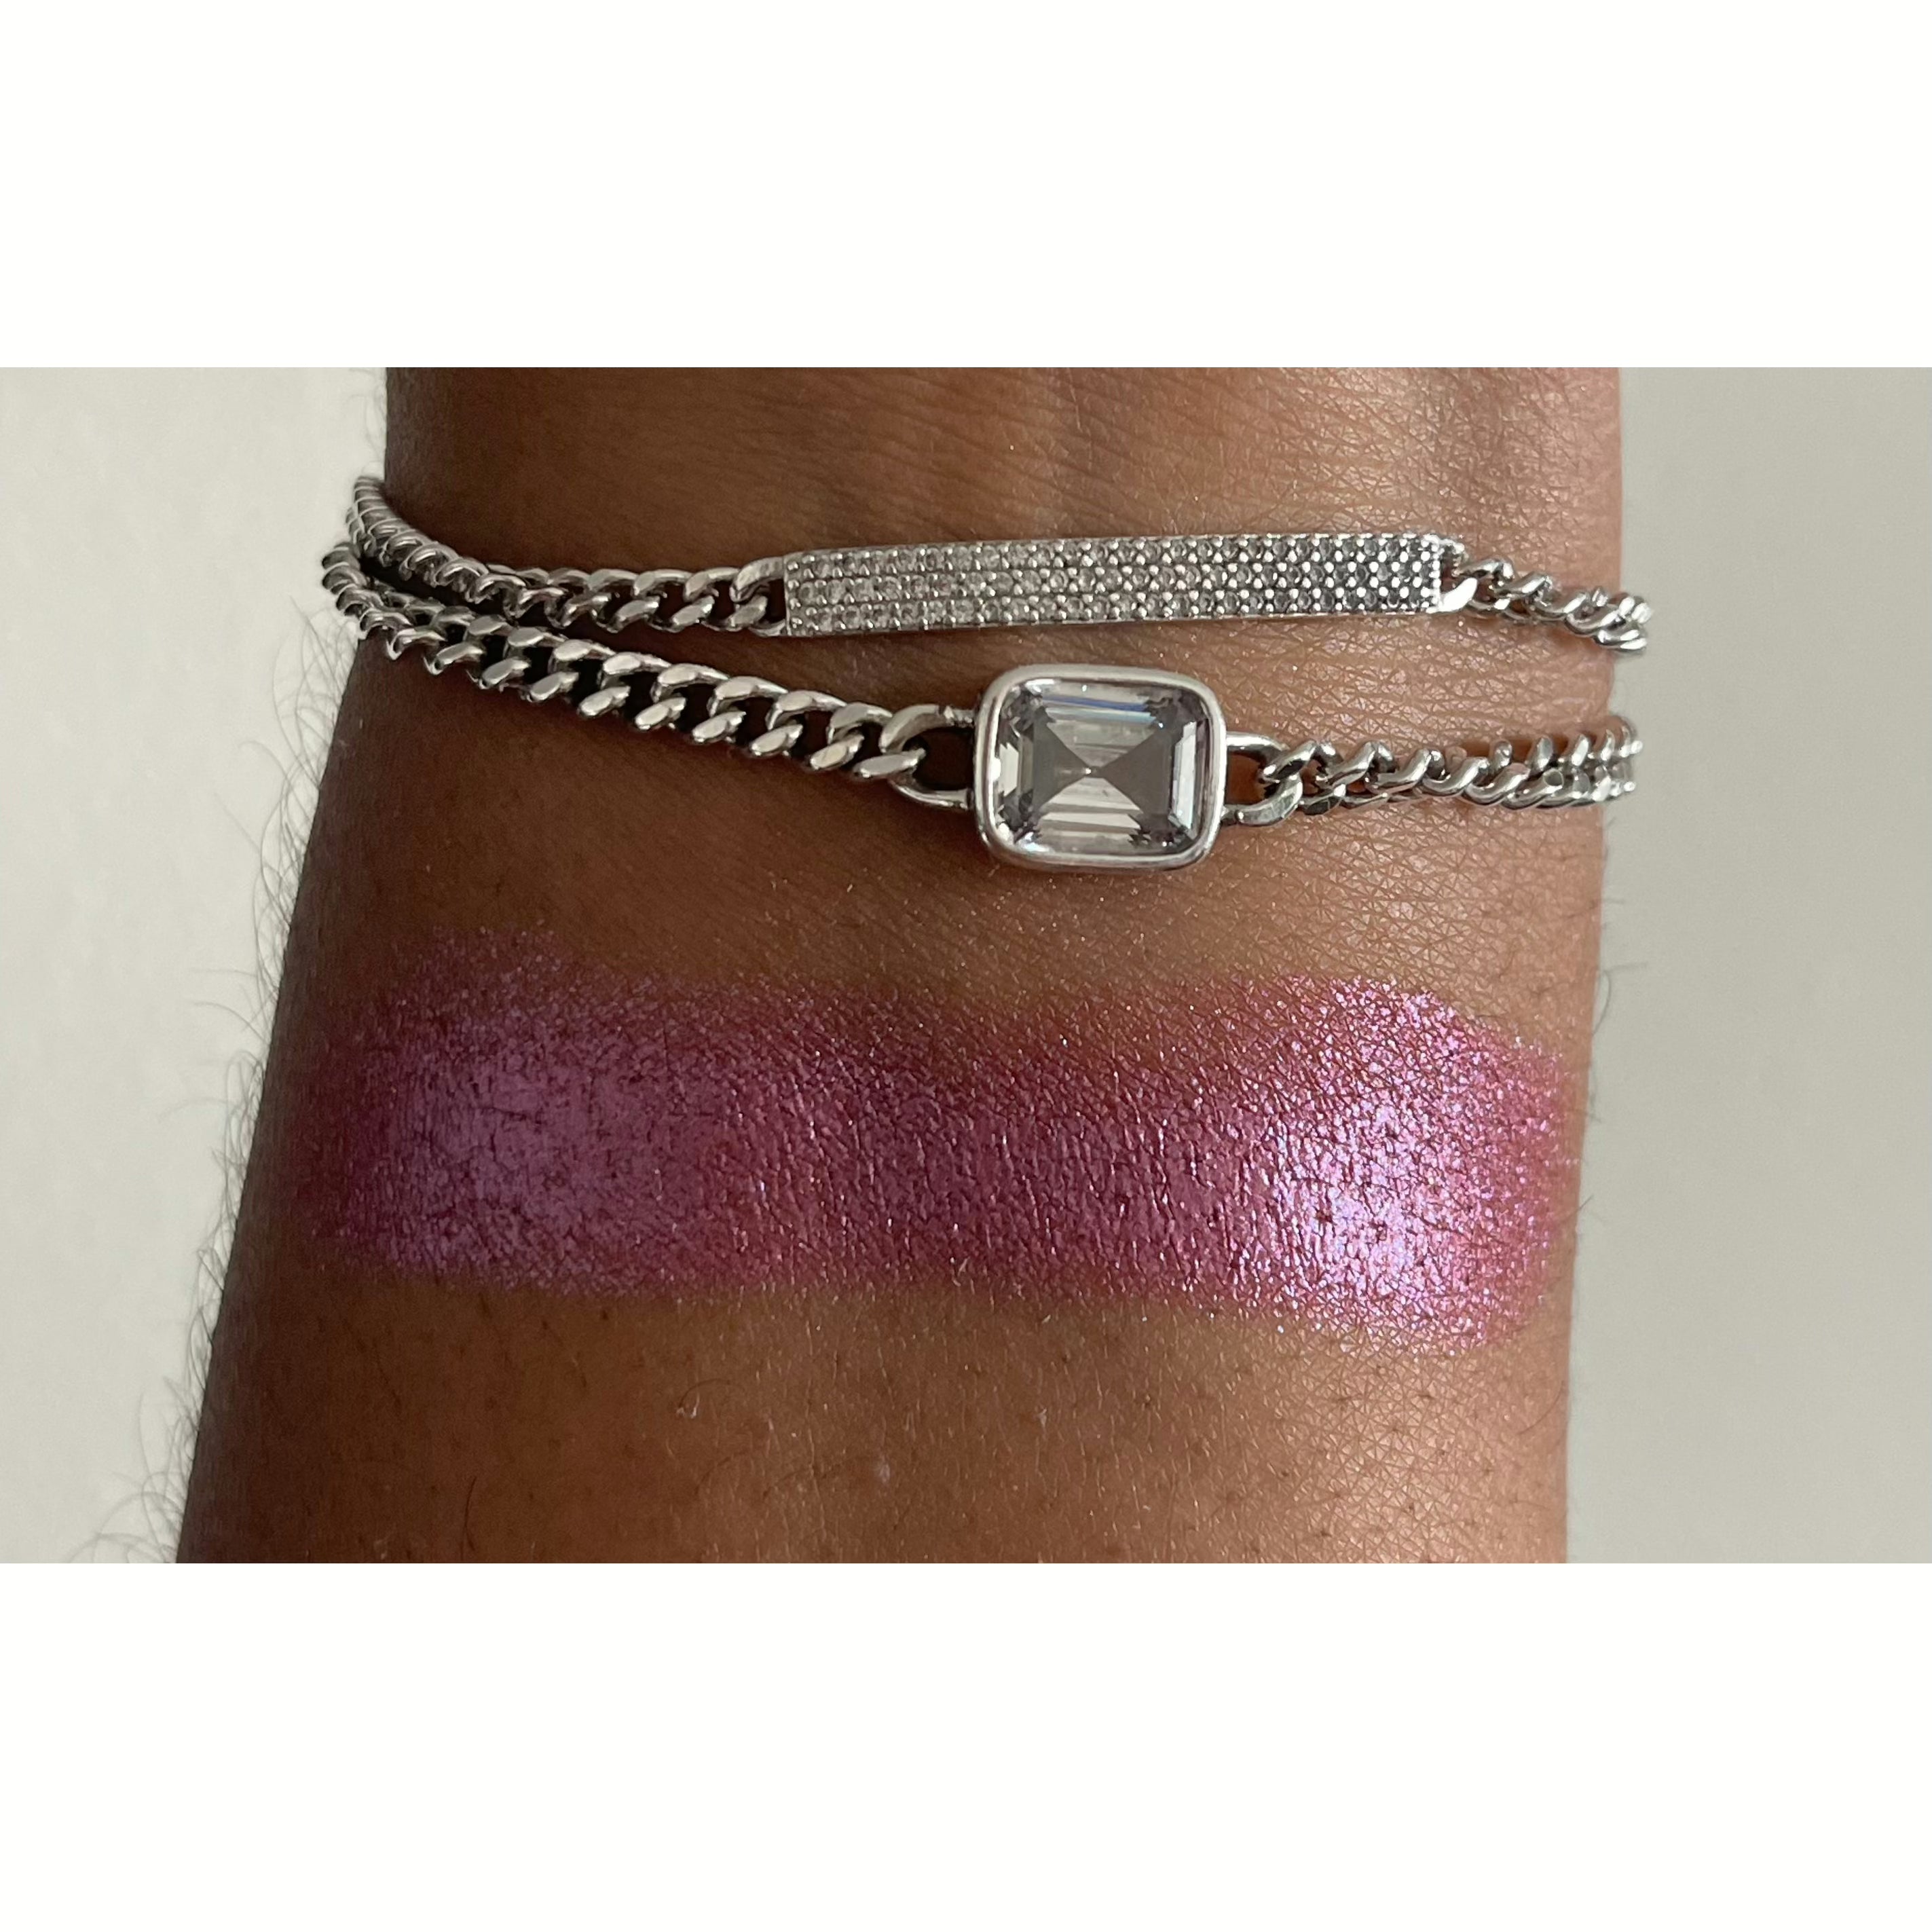 Pretty In Pink [Shimmer]  - Discontinuing